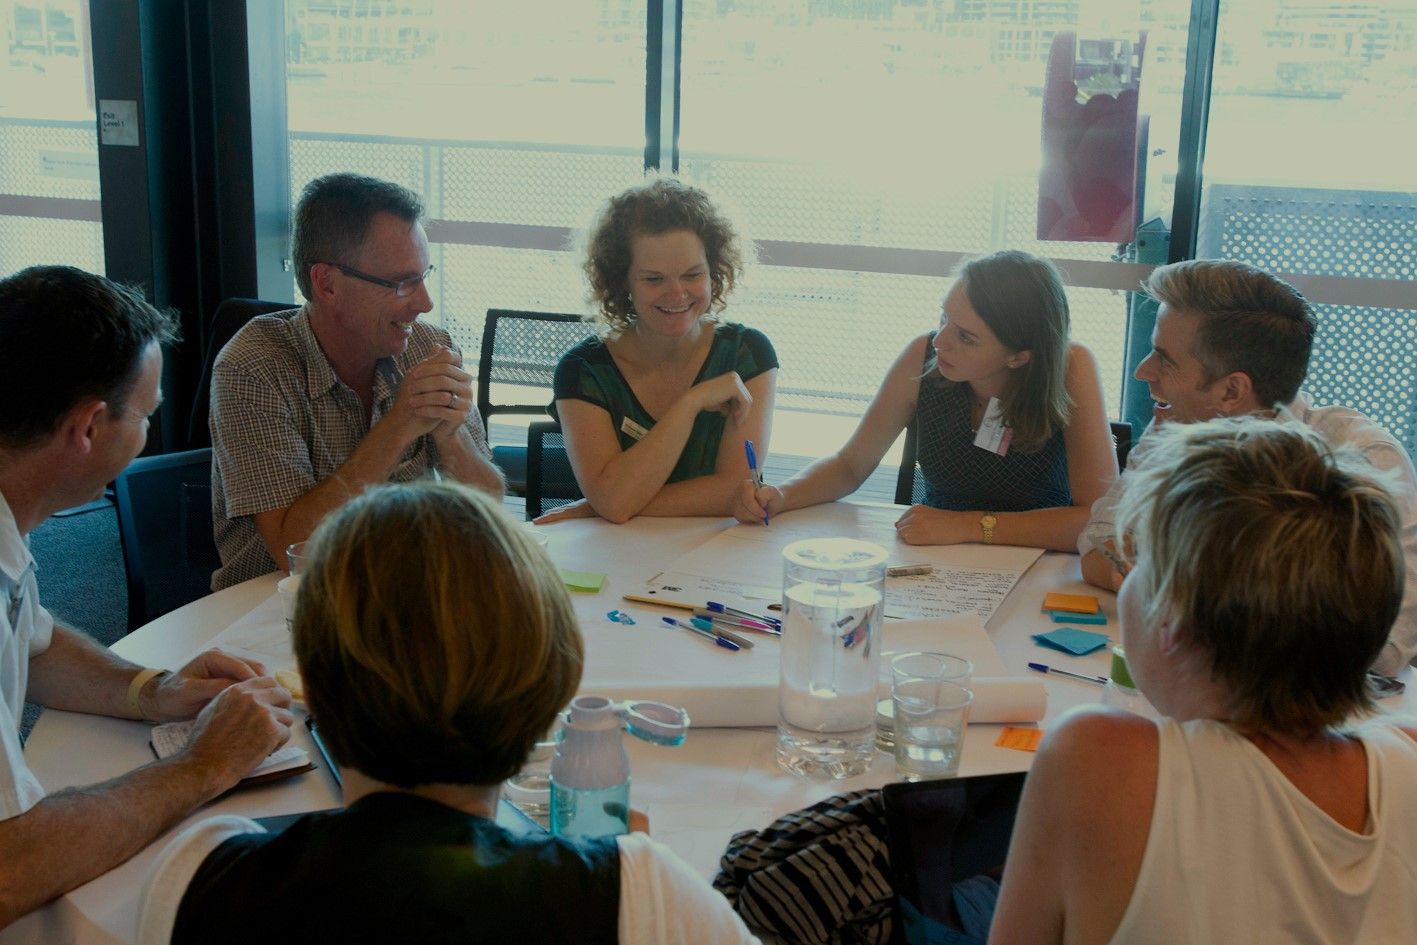 A photograph of participants of the 2017 City Resilience Exchange. The photograph shows a group of people sitting around a table writing down their thoughts and ideas.